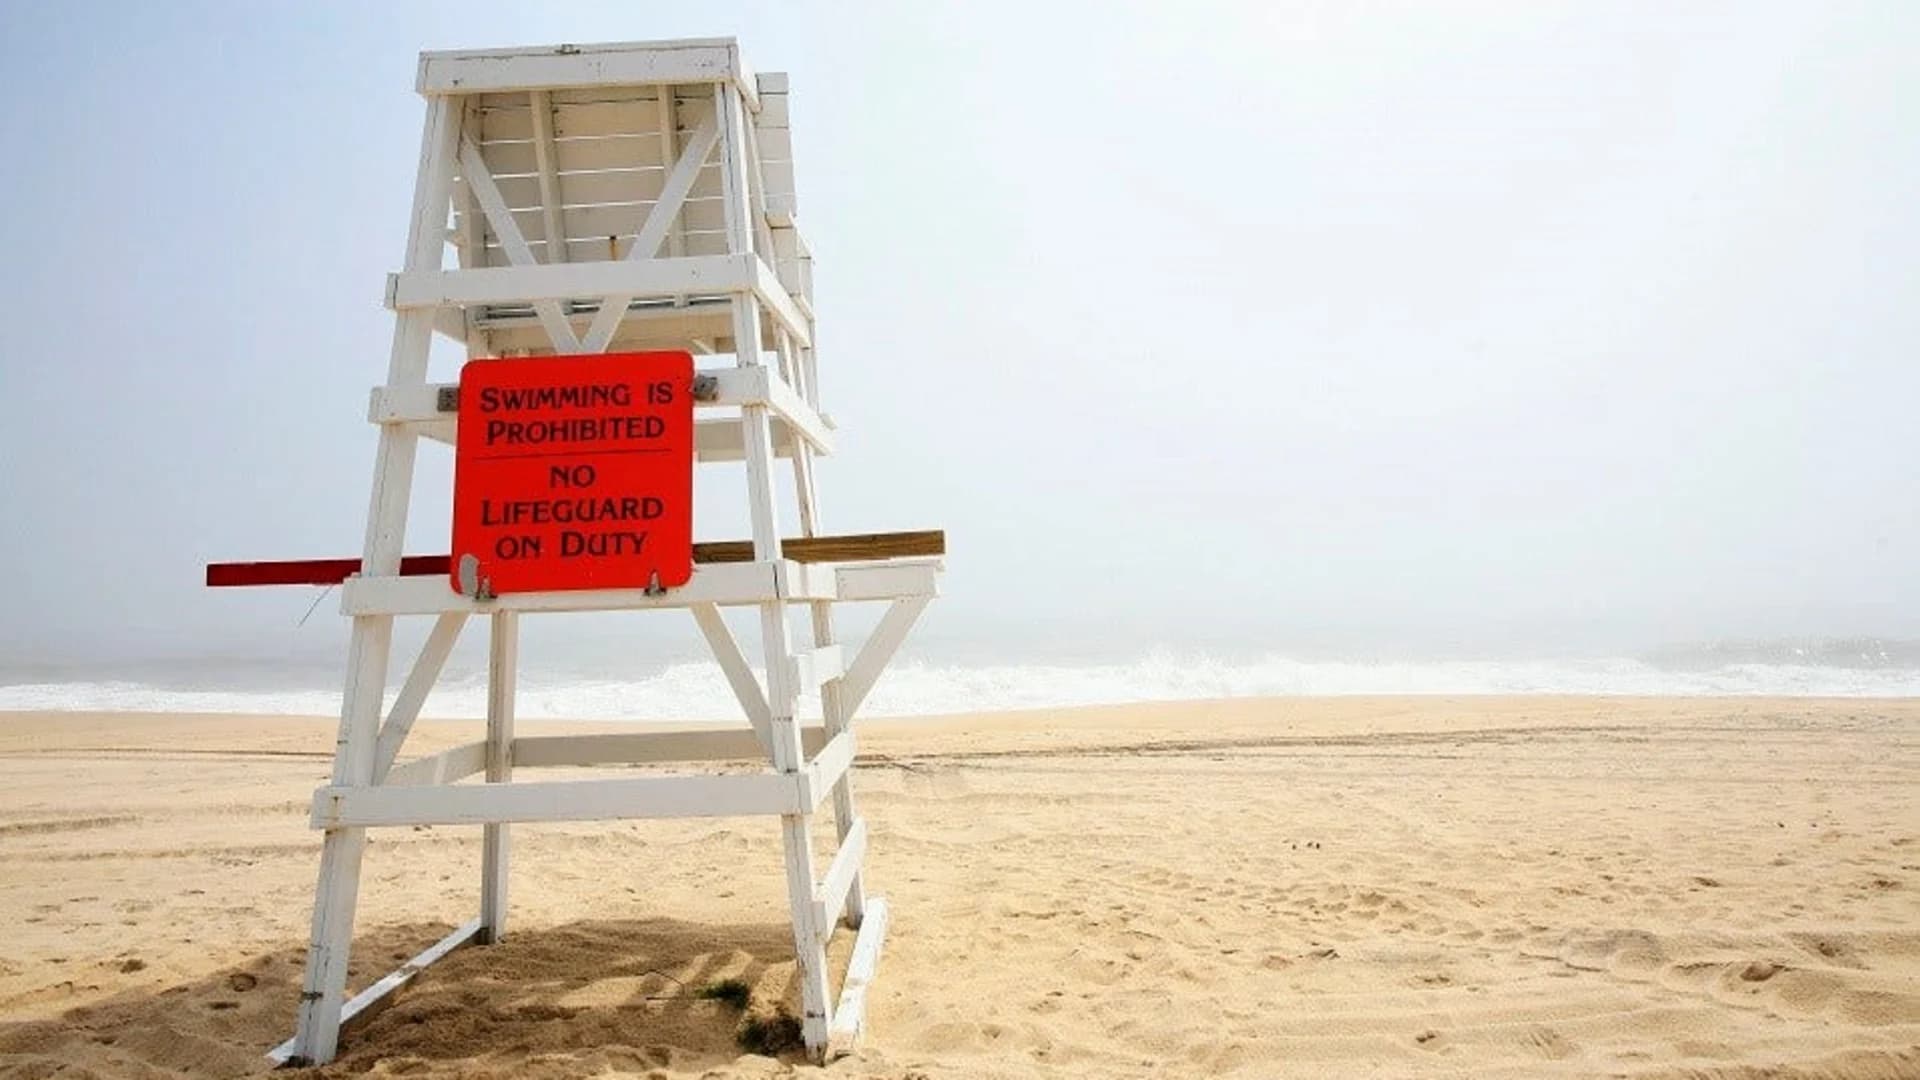 With some beaches set to reopen, Bellone calls them 'part of the fabric of life here'